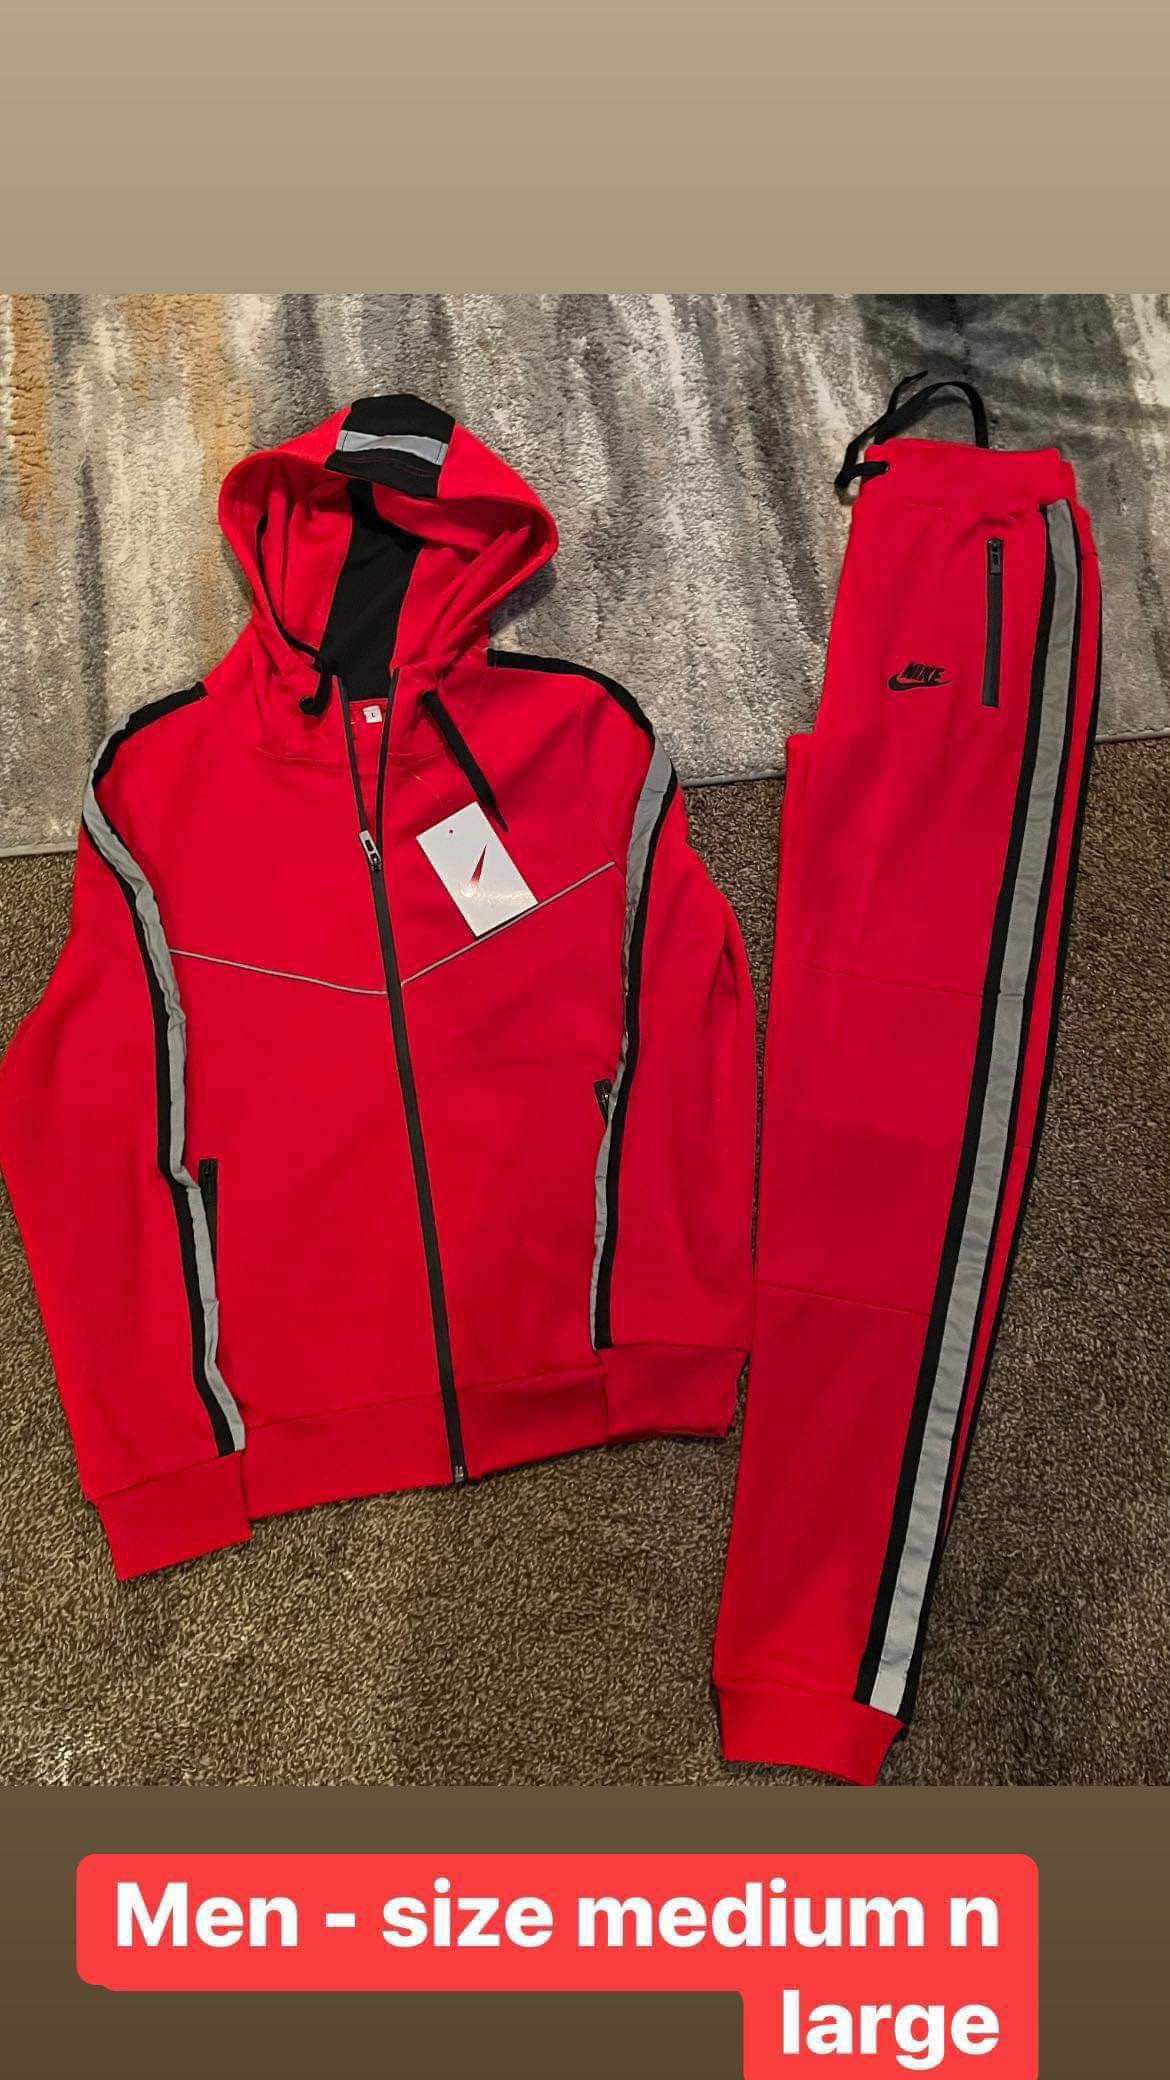 Men Nike Sweatsuits Size Small Med Large Xl 